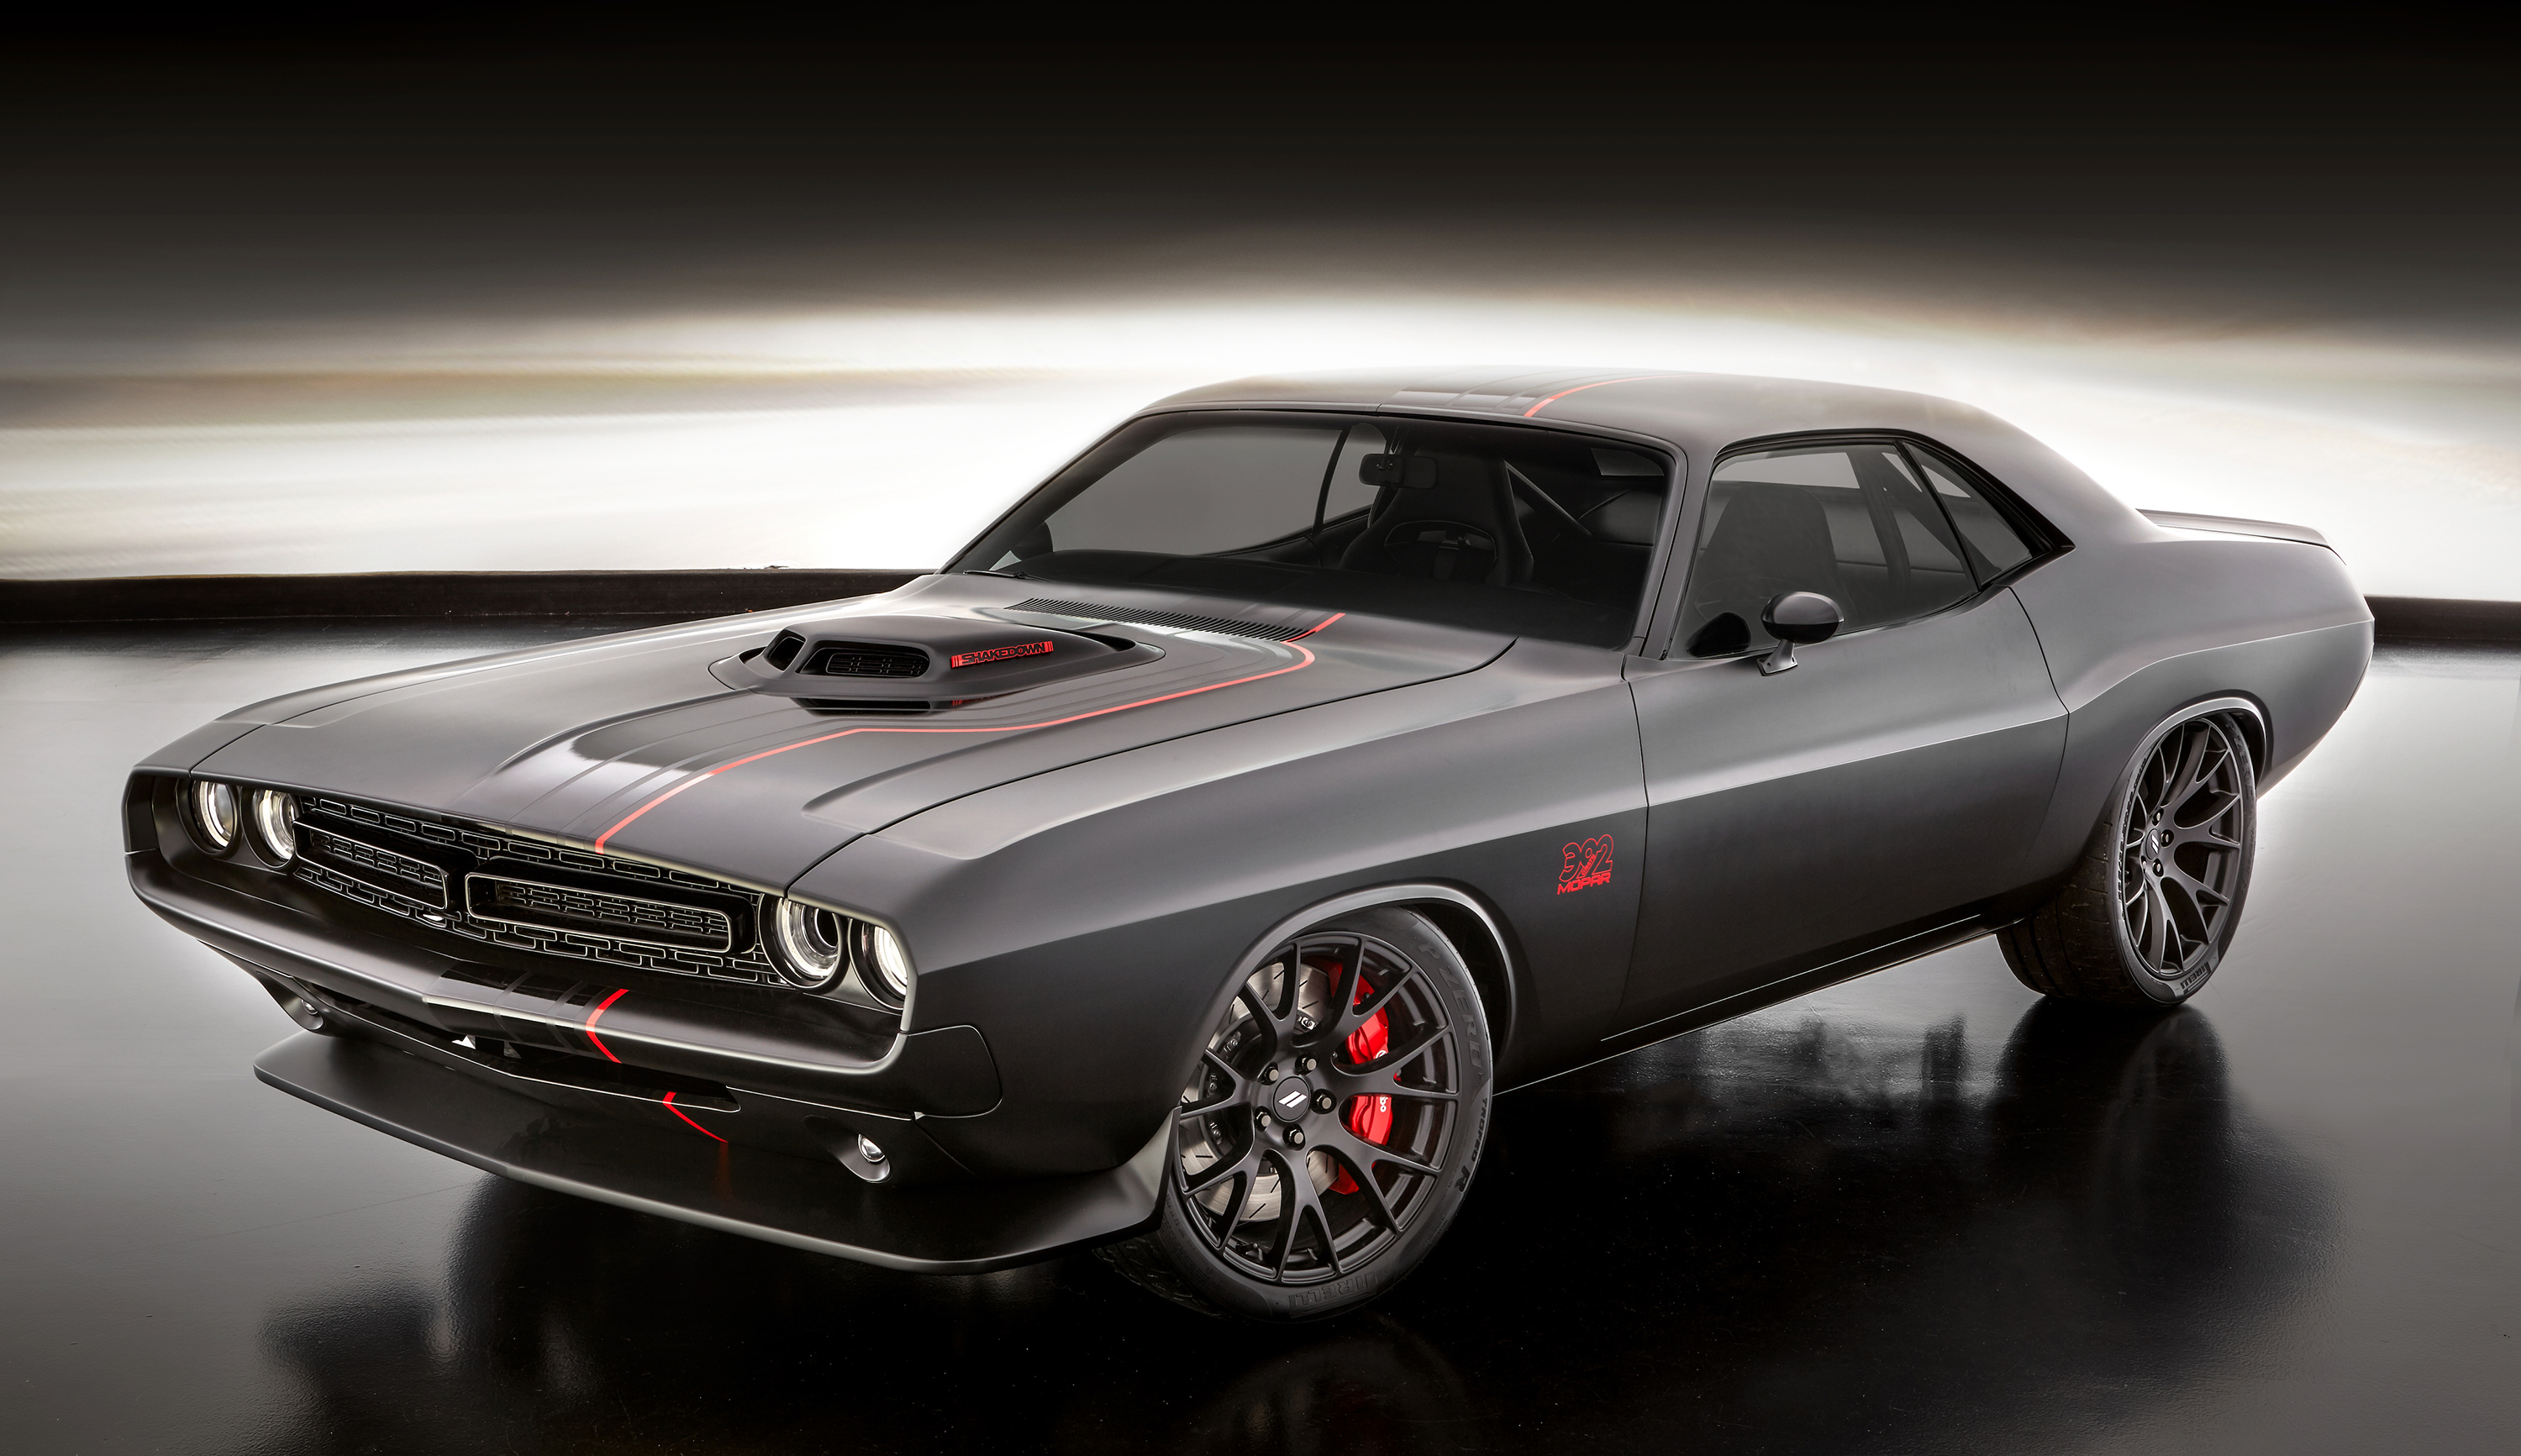 The Dodge Shakedown Challenger weaves together design cues from the past and present to create a uniquely original Mopar creation.